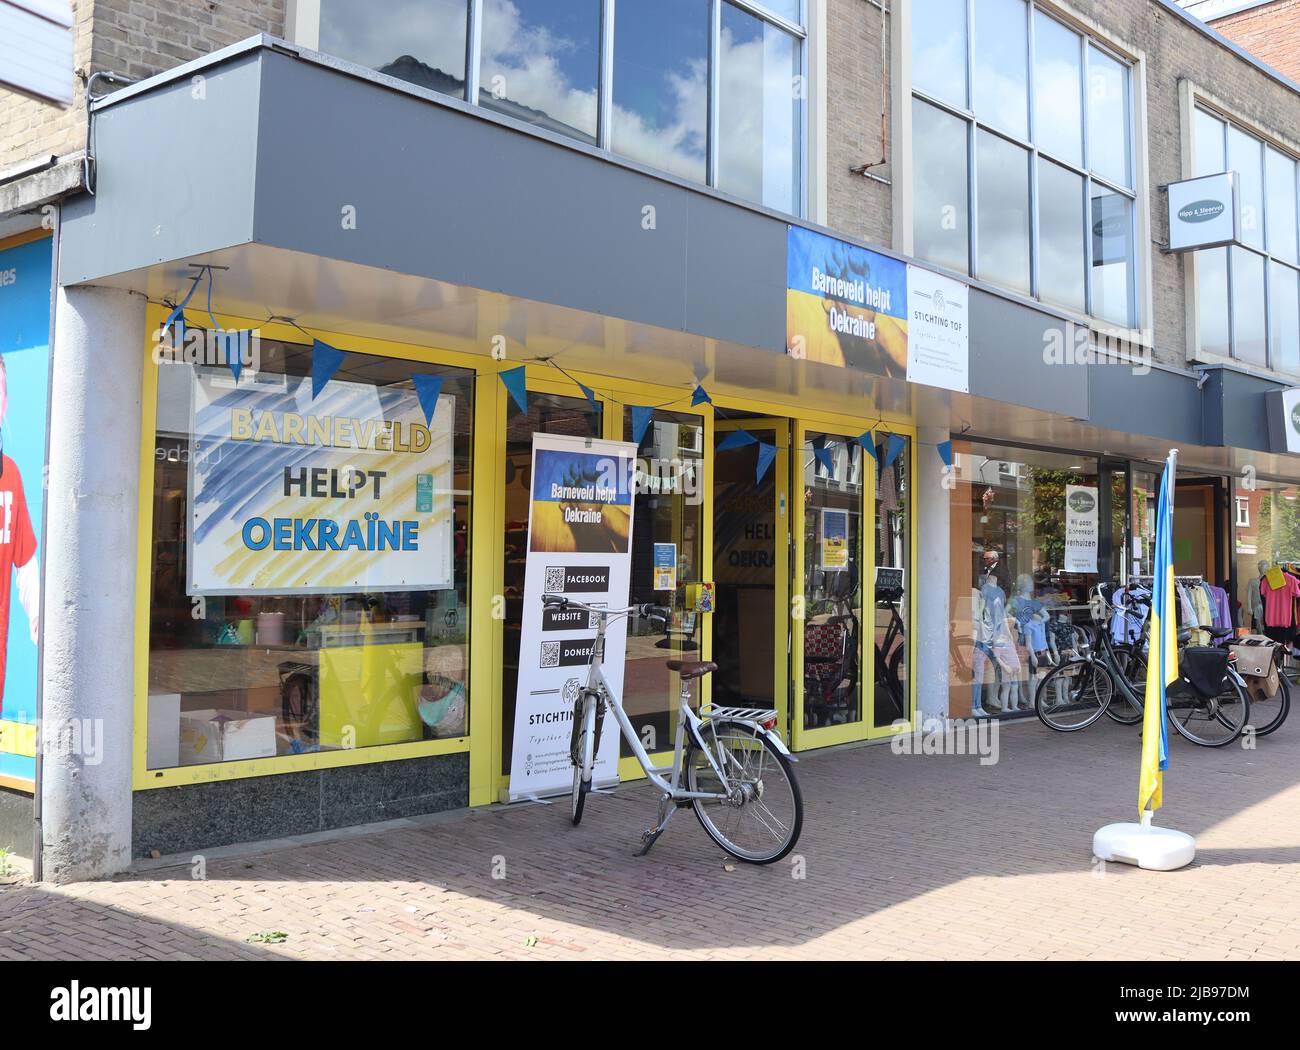 BARNEVELD, NETHERLANDS, 27 MAY 2022: Shop of the Non profit Organisation 'Barneveld helps the Ukraine' in Barneveld. The organisation was set up speci Stock Photo